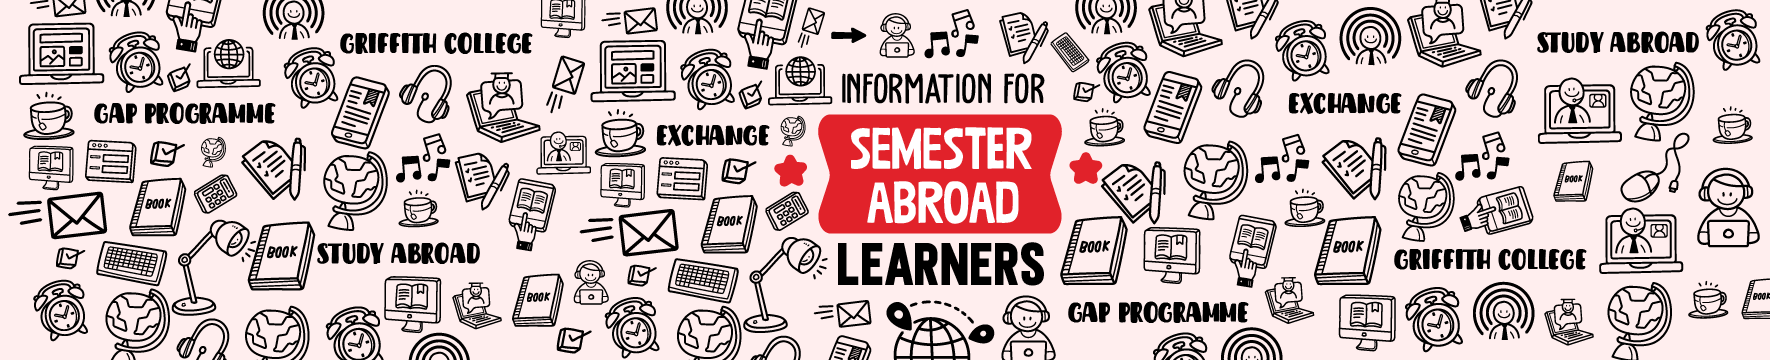 Course Image Semester Abroad Learners - Info Page